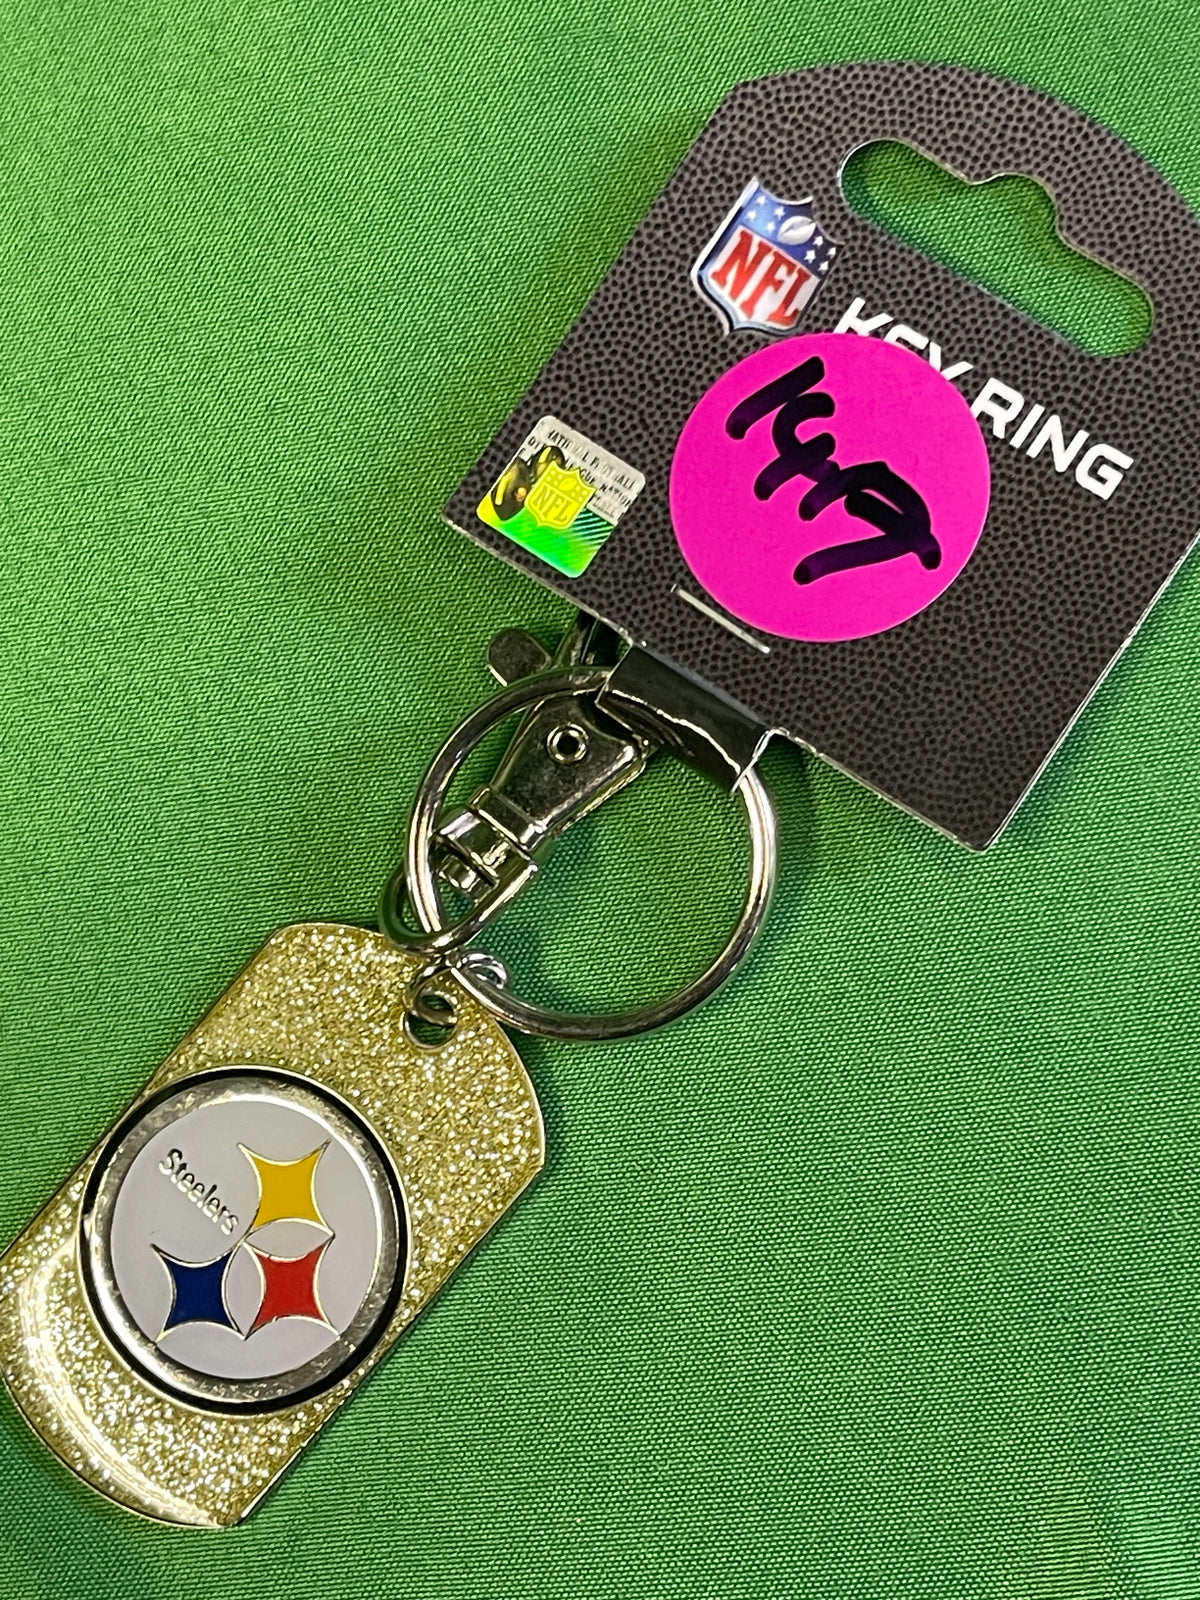 NFL Pittsburgh Steelers Glitter Sparkly Keychain Key Ring w/Clip NWT